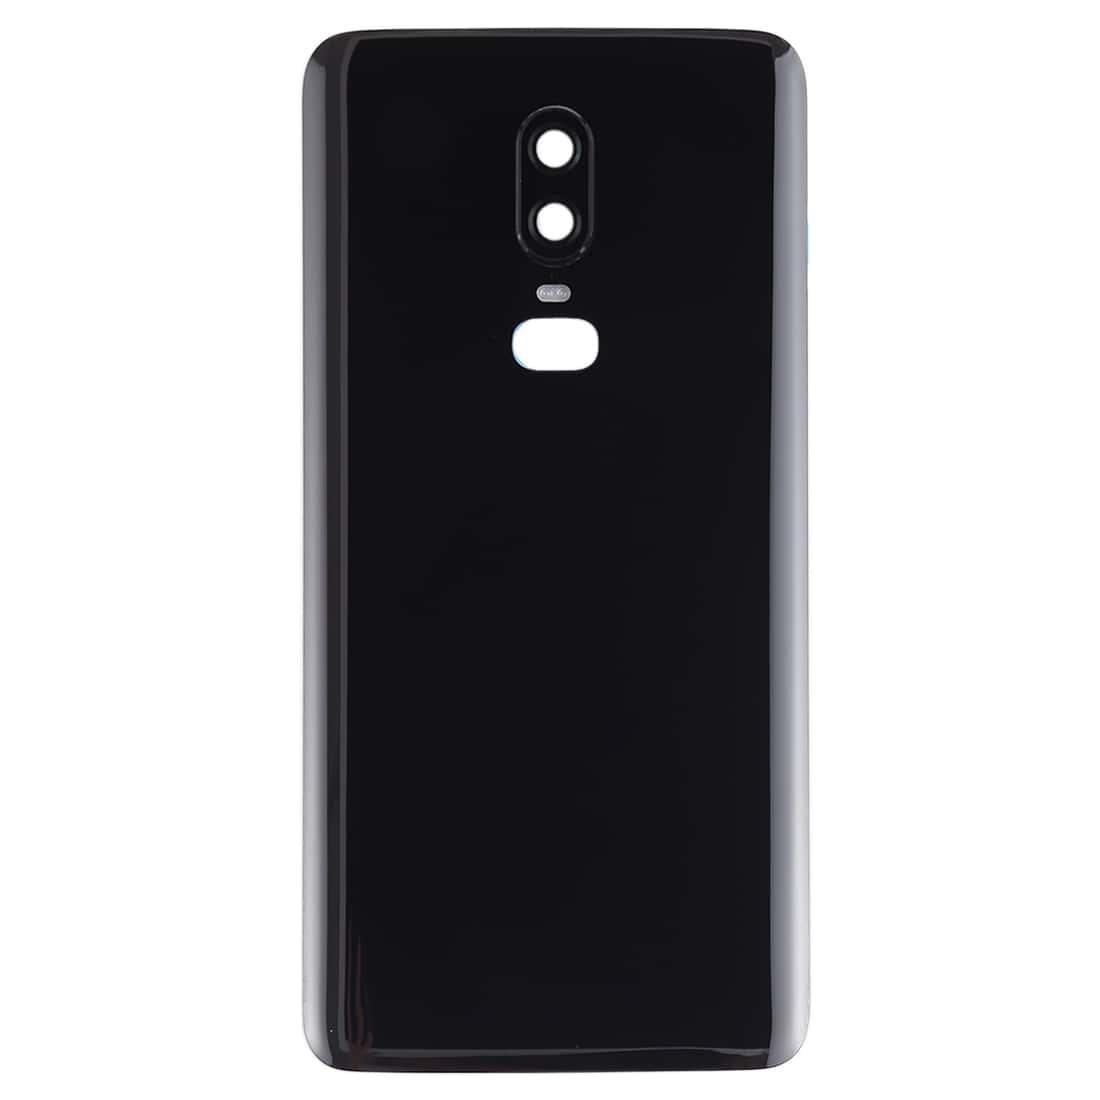 Back Glass Panel for  Oneplus 6 Black